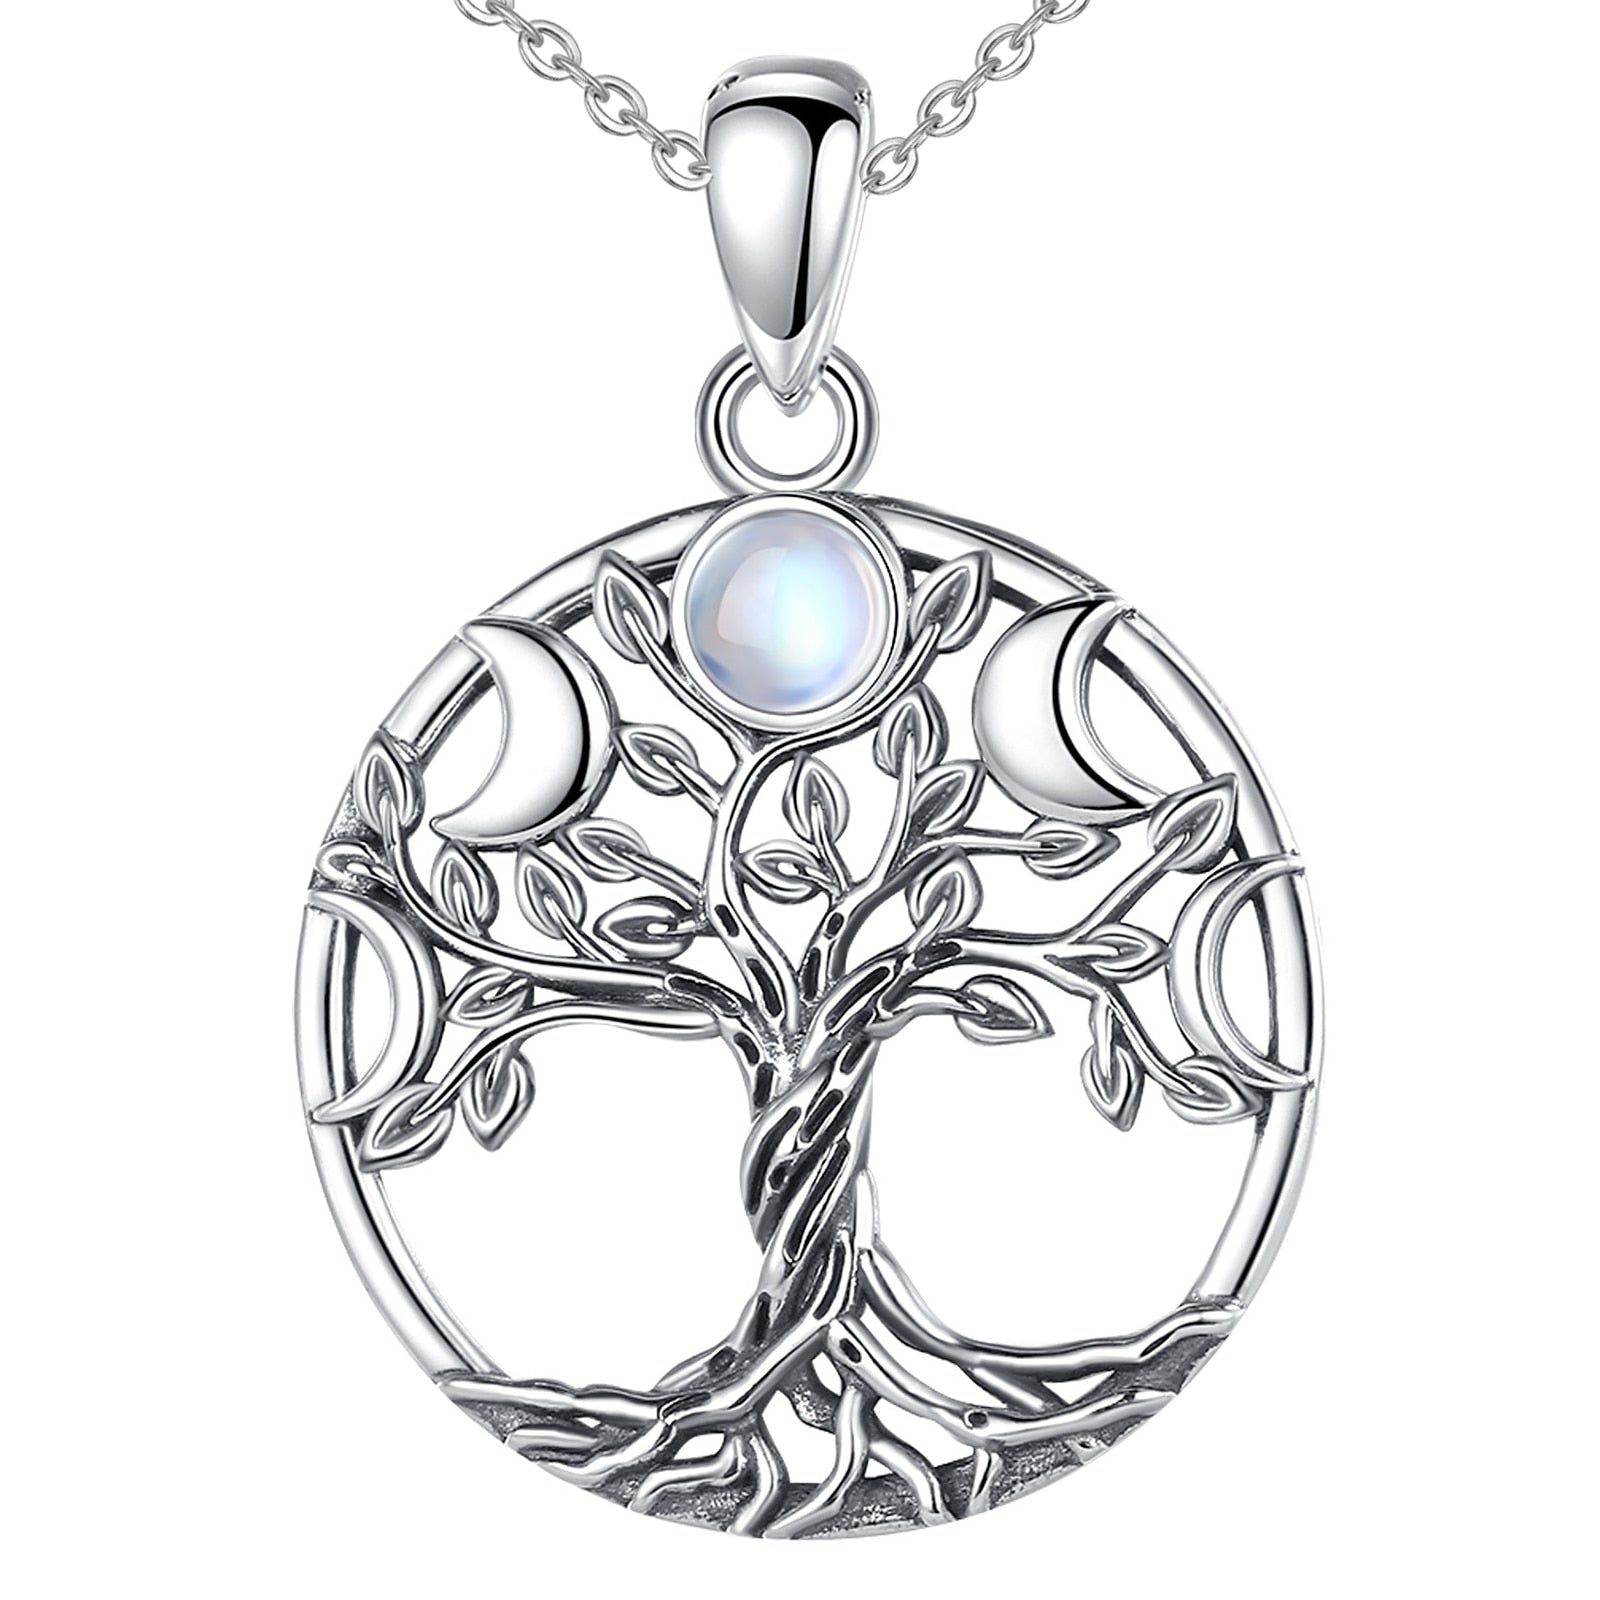 Tree of Life Necklace Wicca moon phase necklace-MoonChildWorld